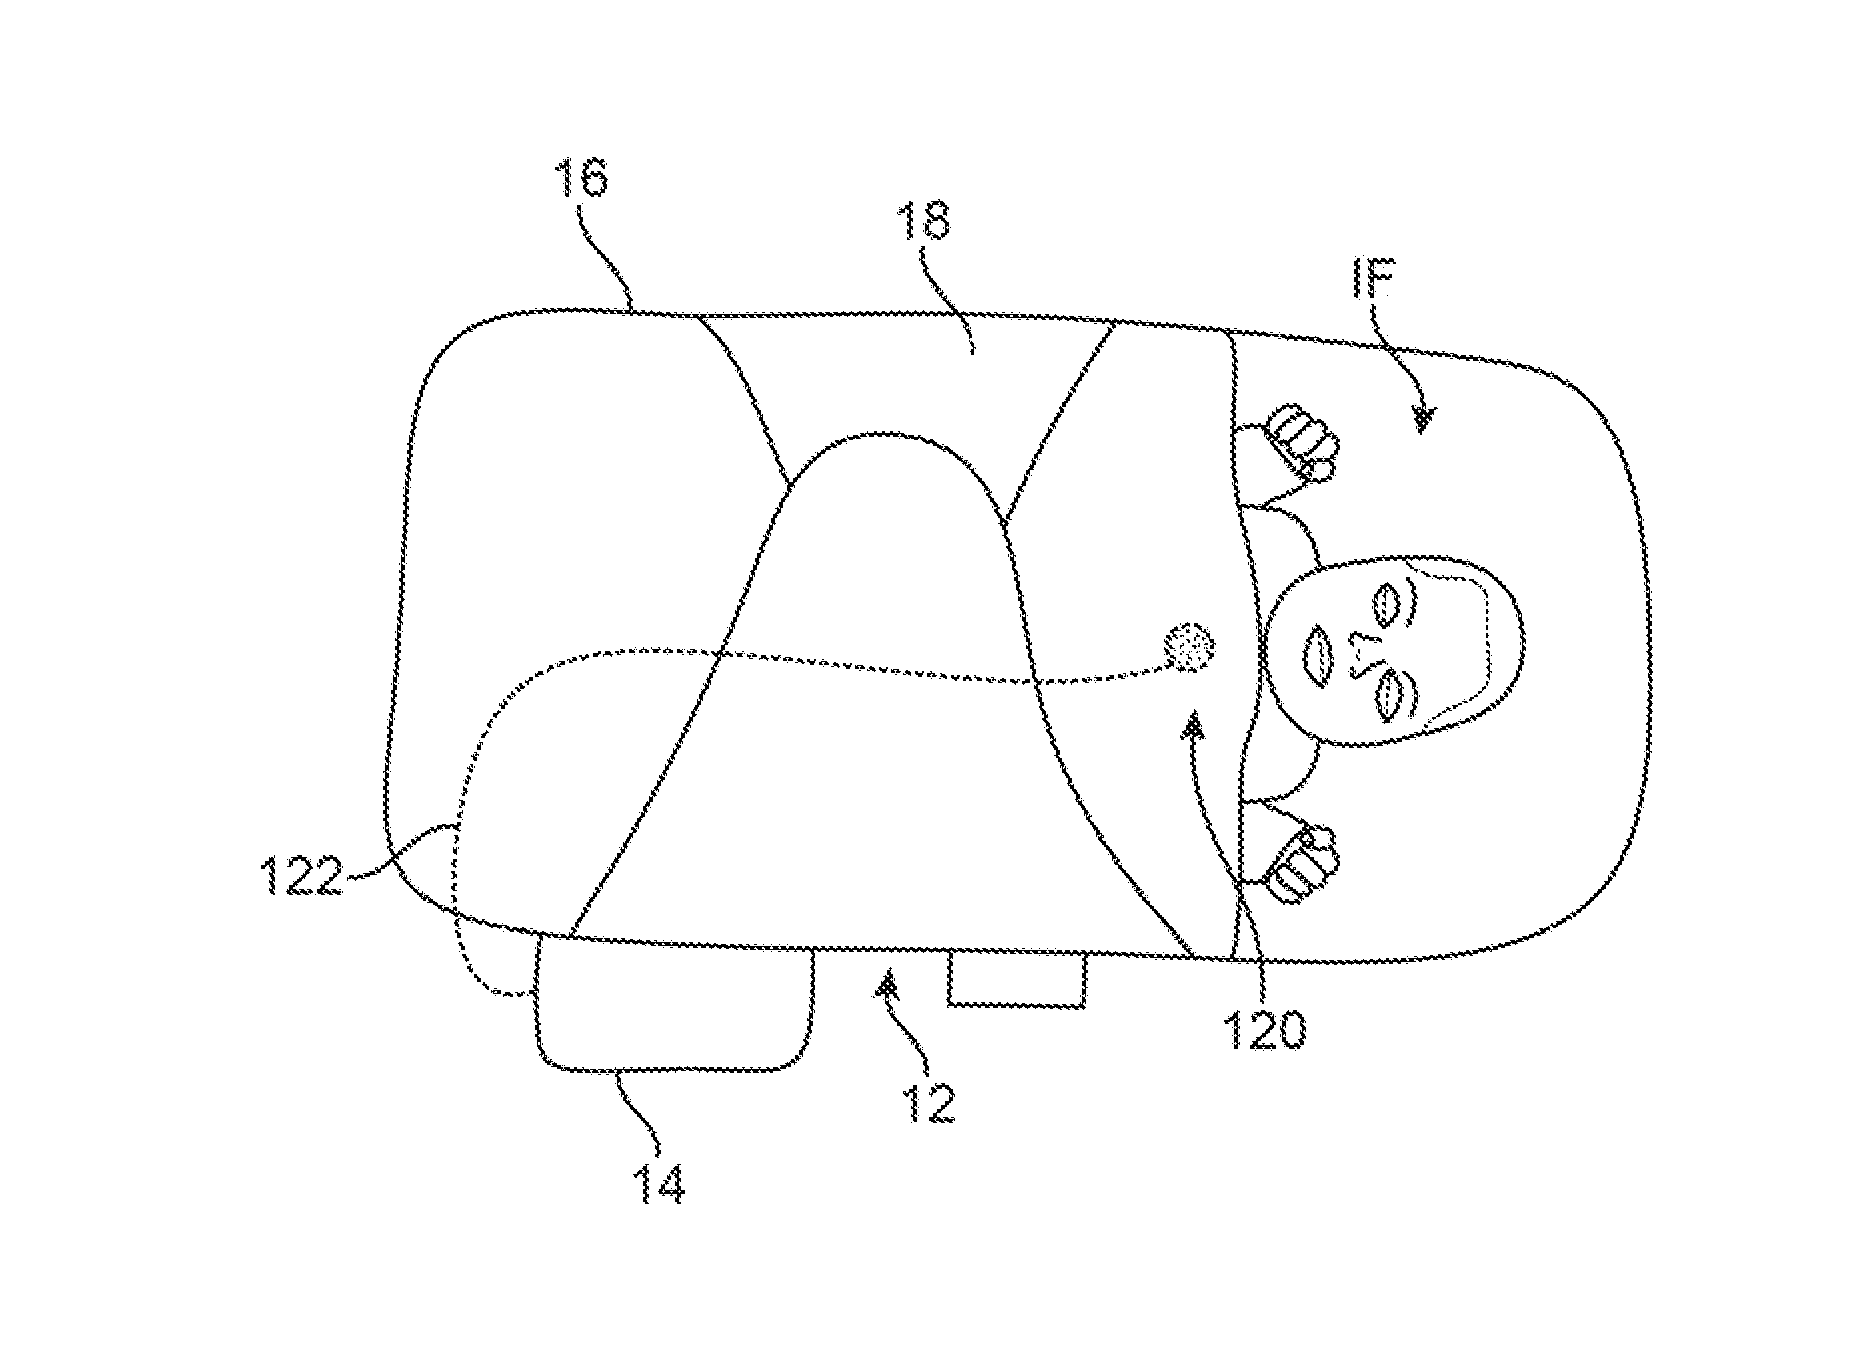 Infant warming systems